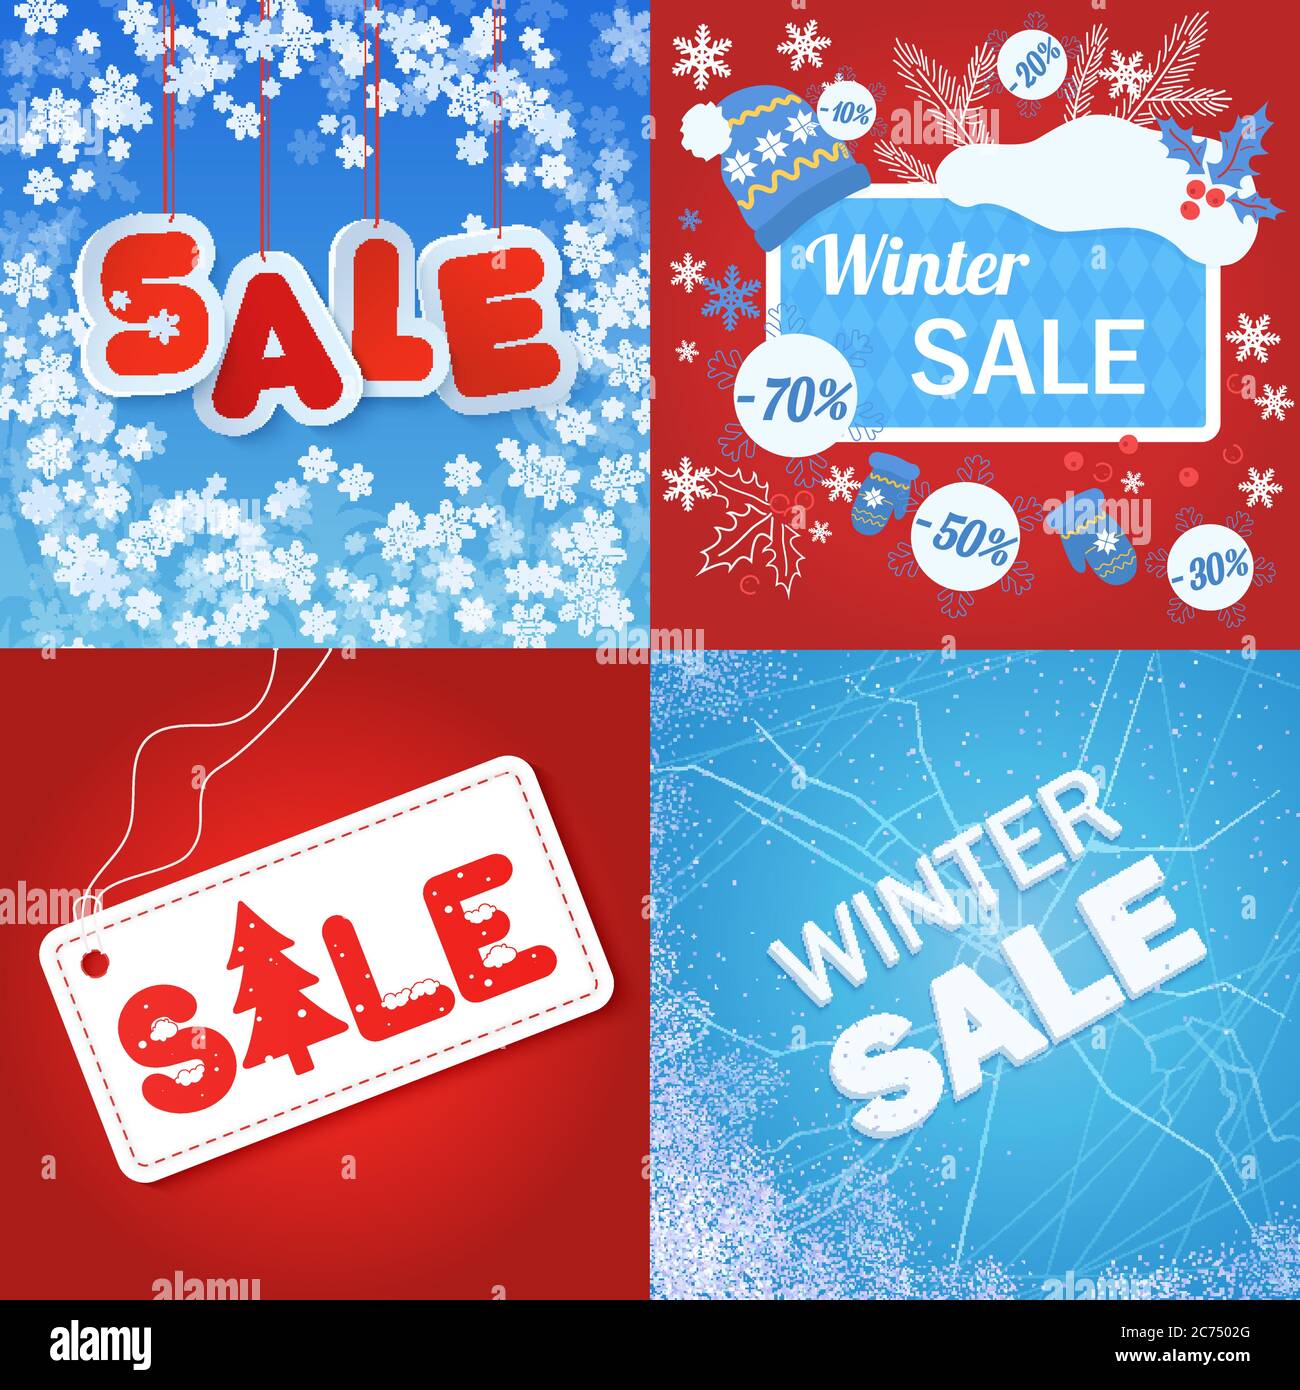 Vector illustration of blue and red colored winter sale announcements. Stock Vector